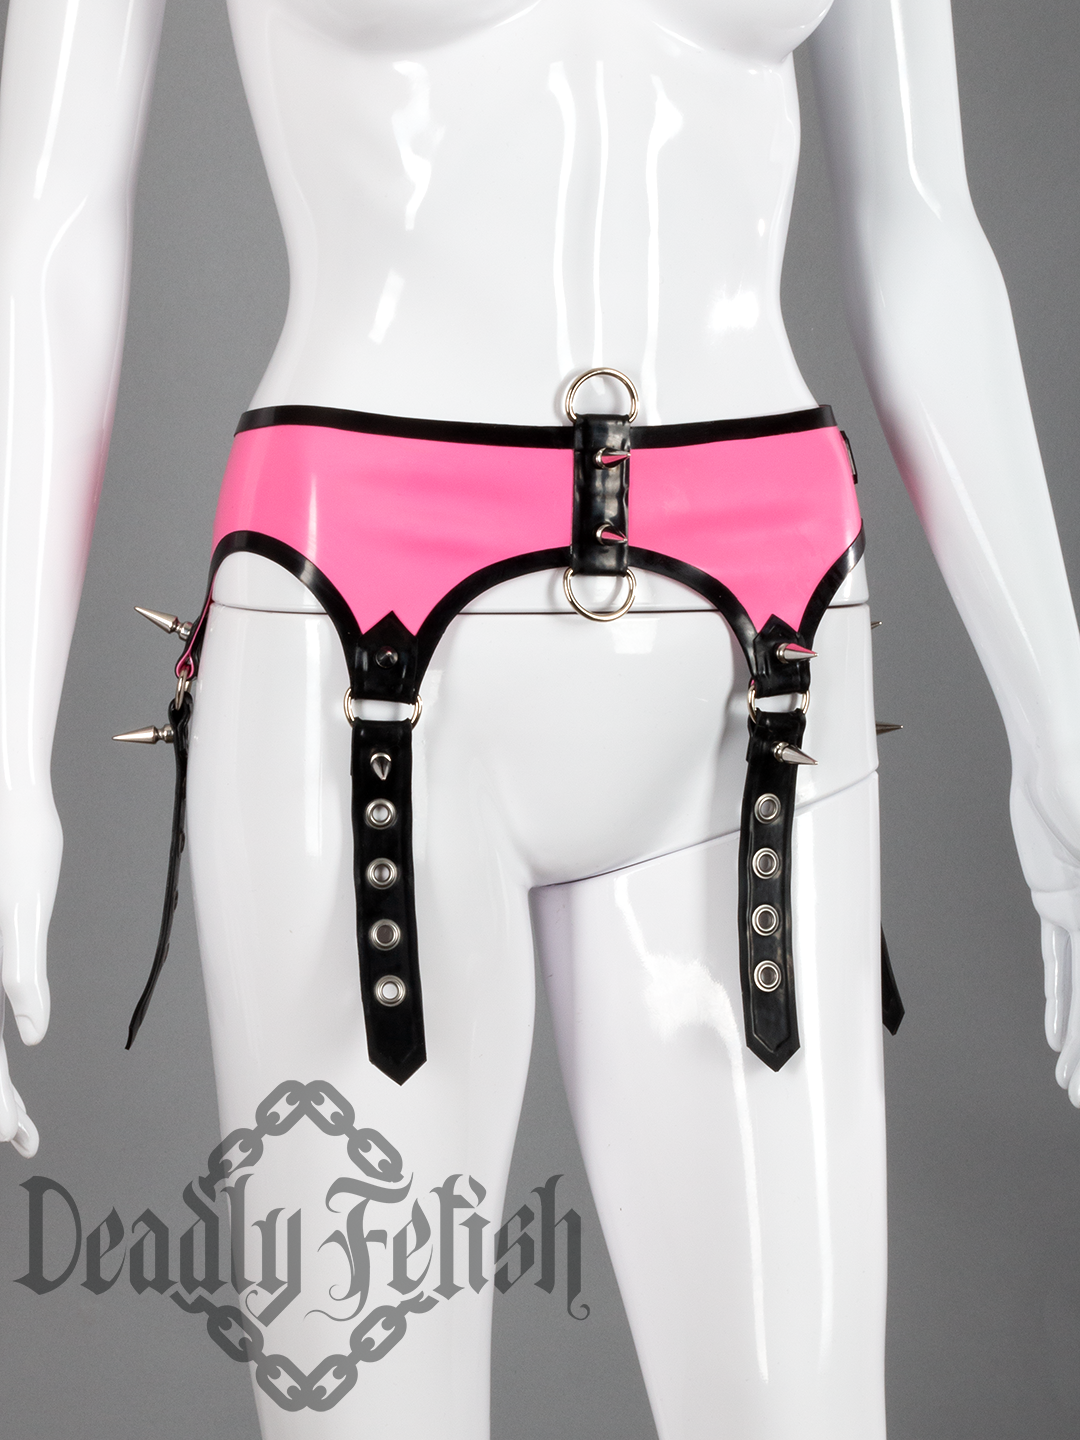 Deadly Fetish Latex: Harness #73